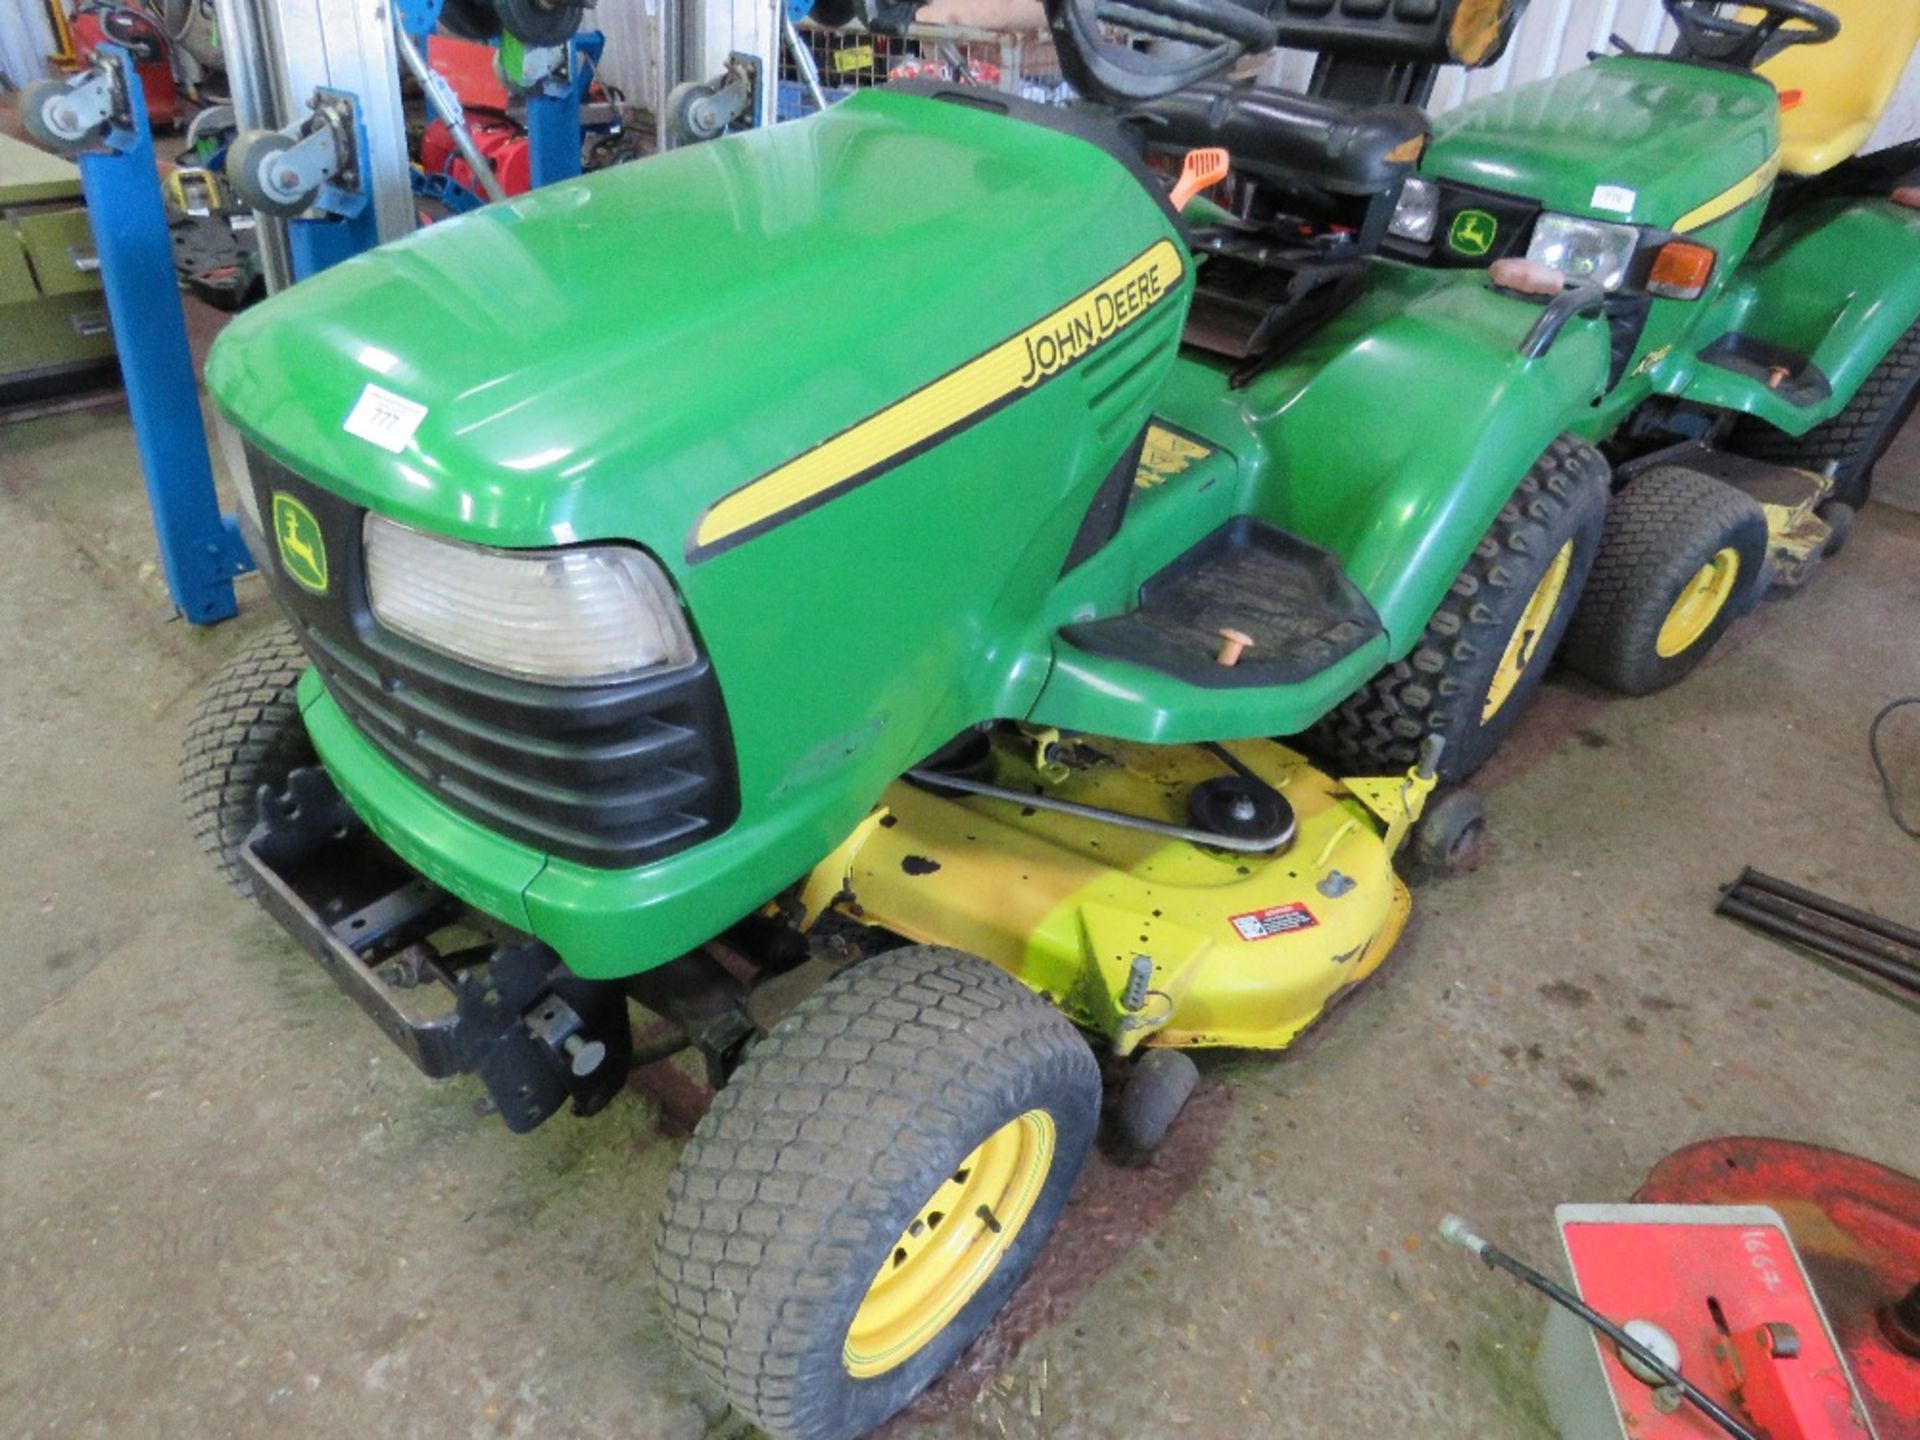 JOHN DEERE X748 4WD RIDE ON MOWER. WHEN TESTED WAS SEEN TO RUN, DRIVE, STEER AND MOWERS TURNED. - Image 2 of 5